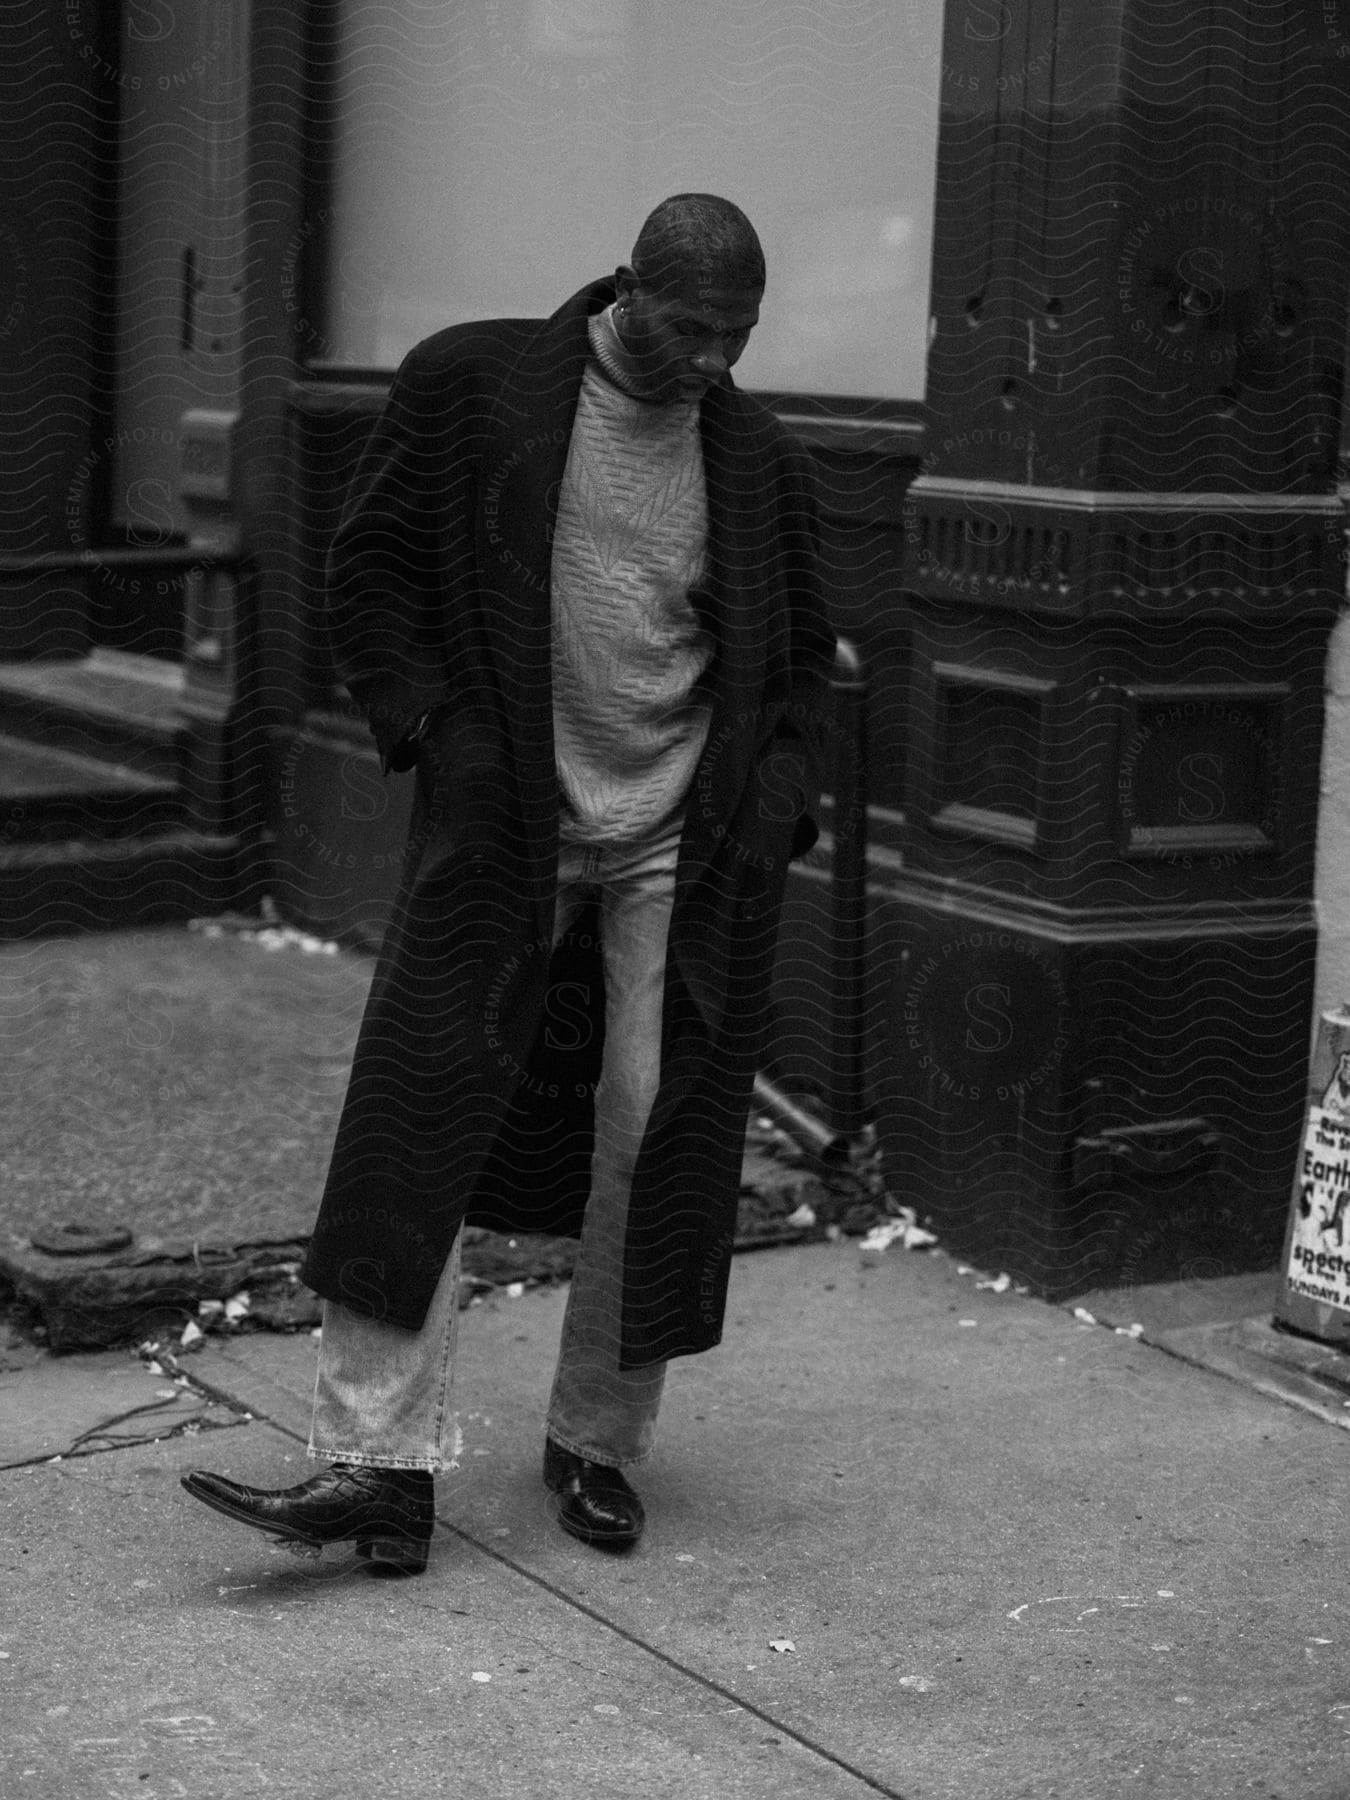 Person in long coat and jeans walking on a littered sidewalk by a dark building